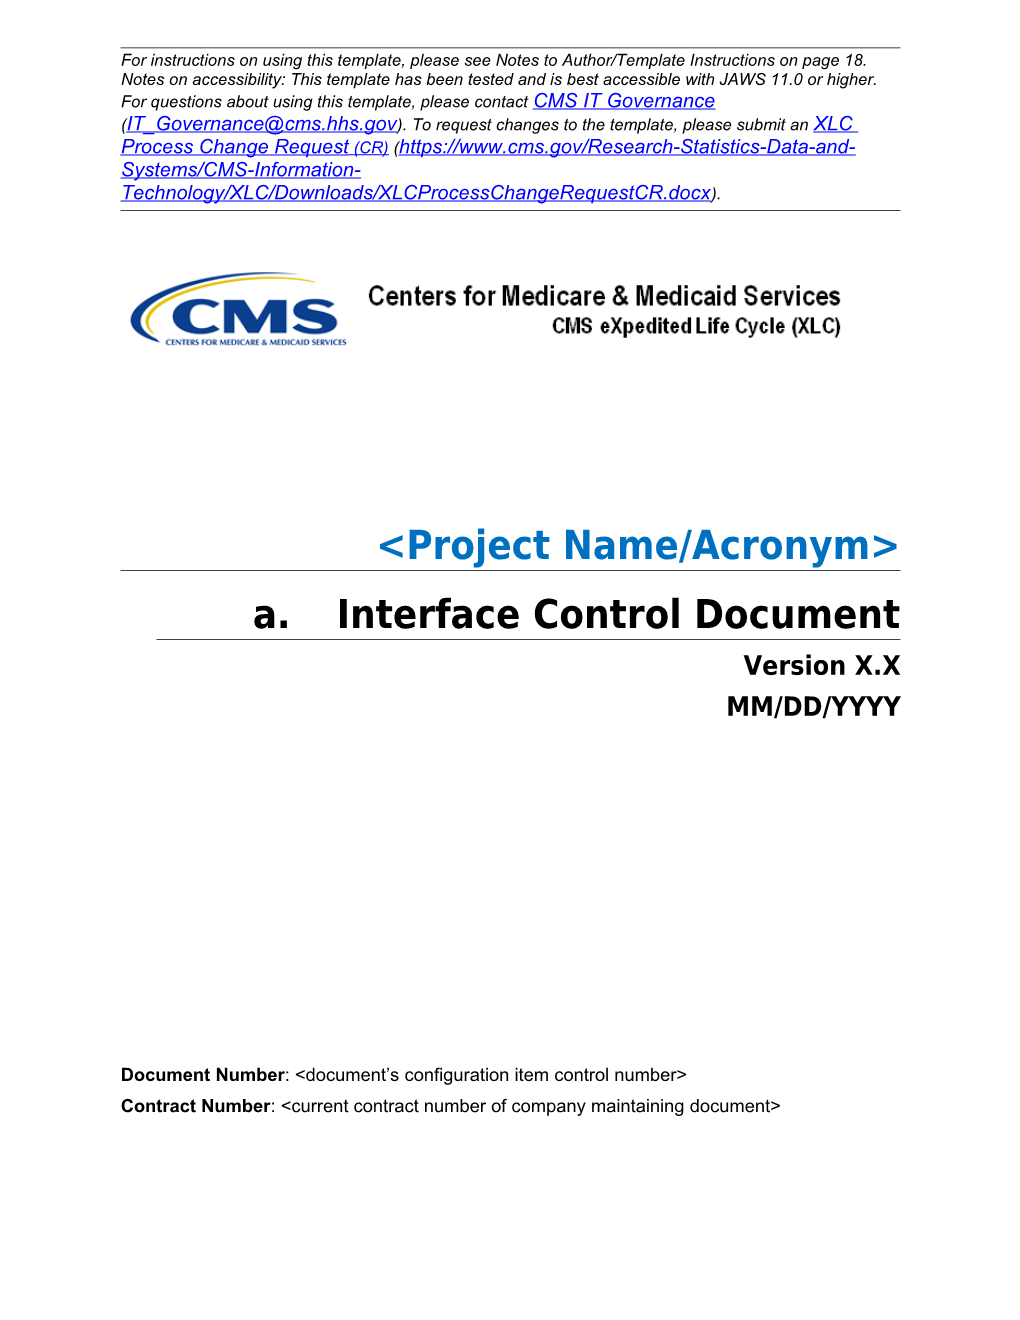 Interface Control Document (ICD) Template